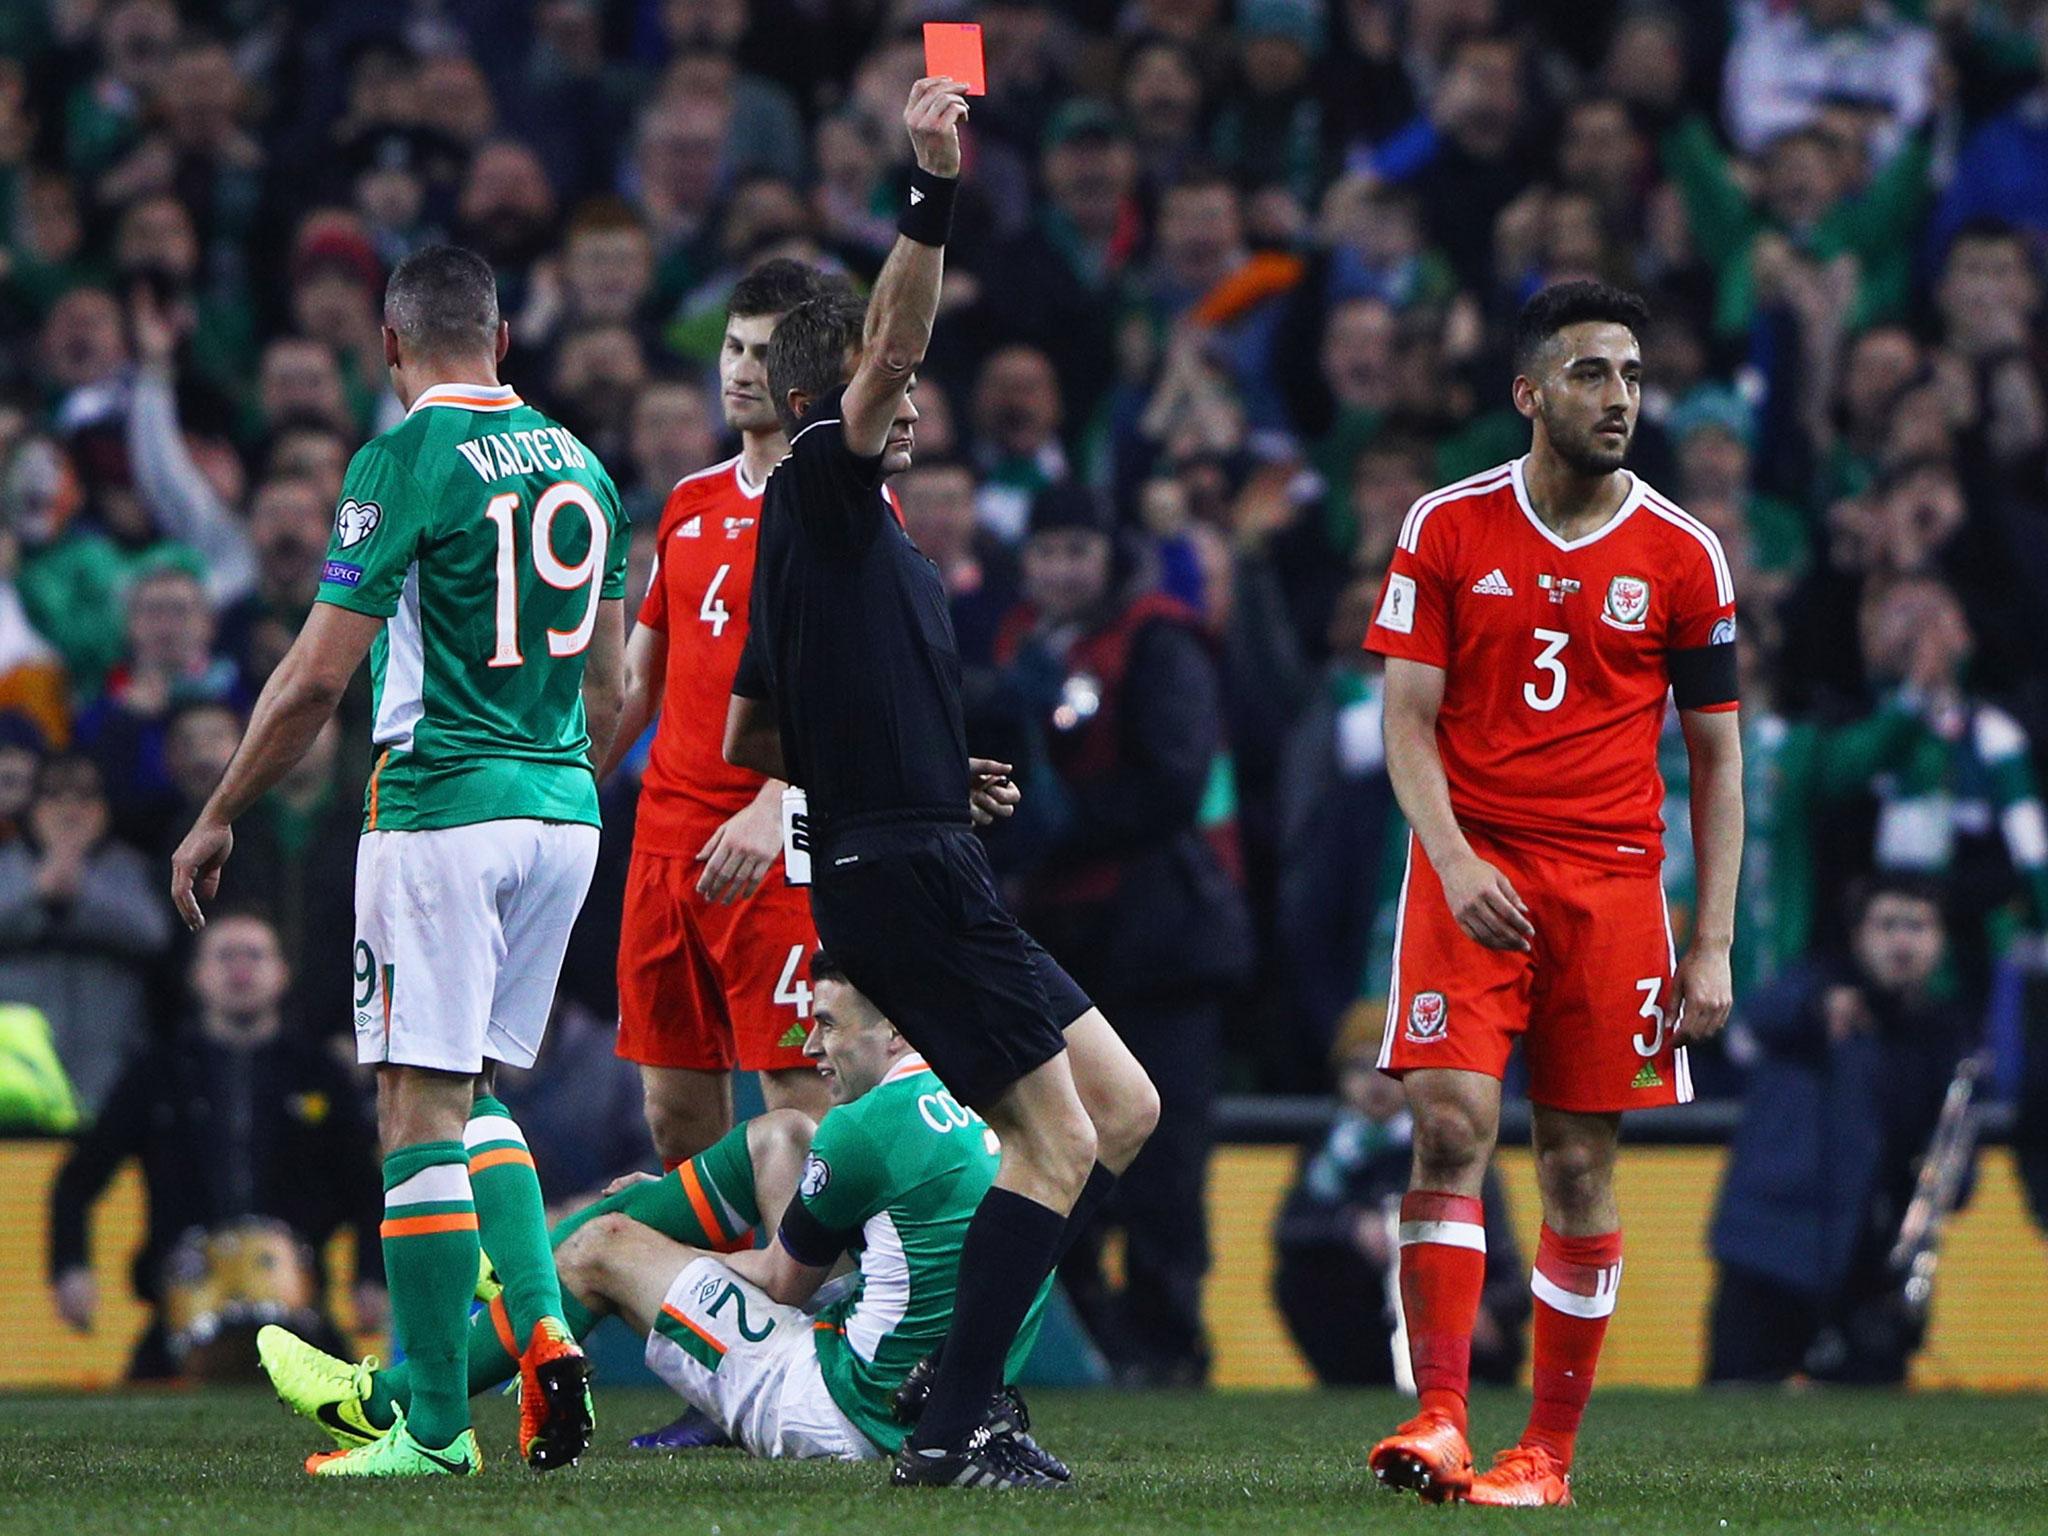 Neil Taylor was sent-off for his challenge on Republic of Ireland defender Seamus Coleman